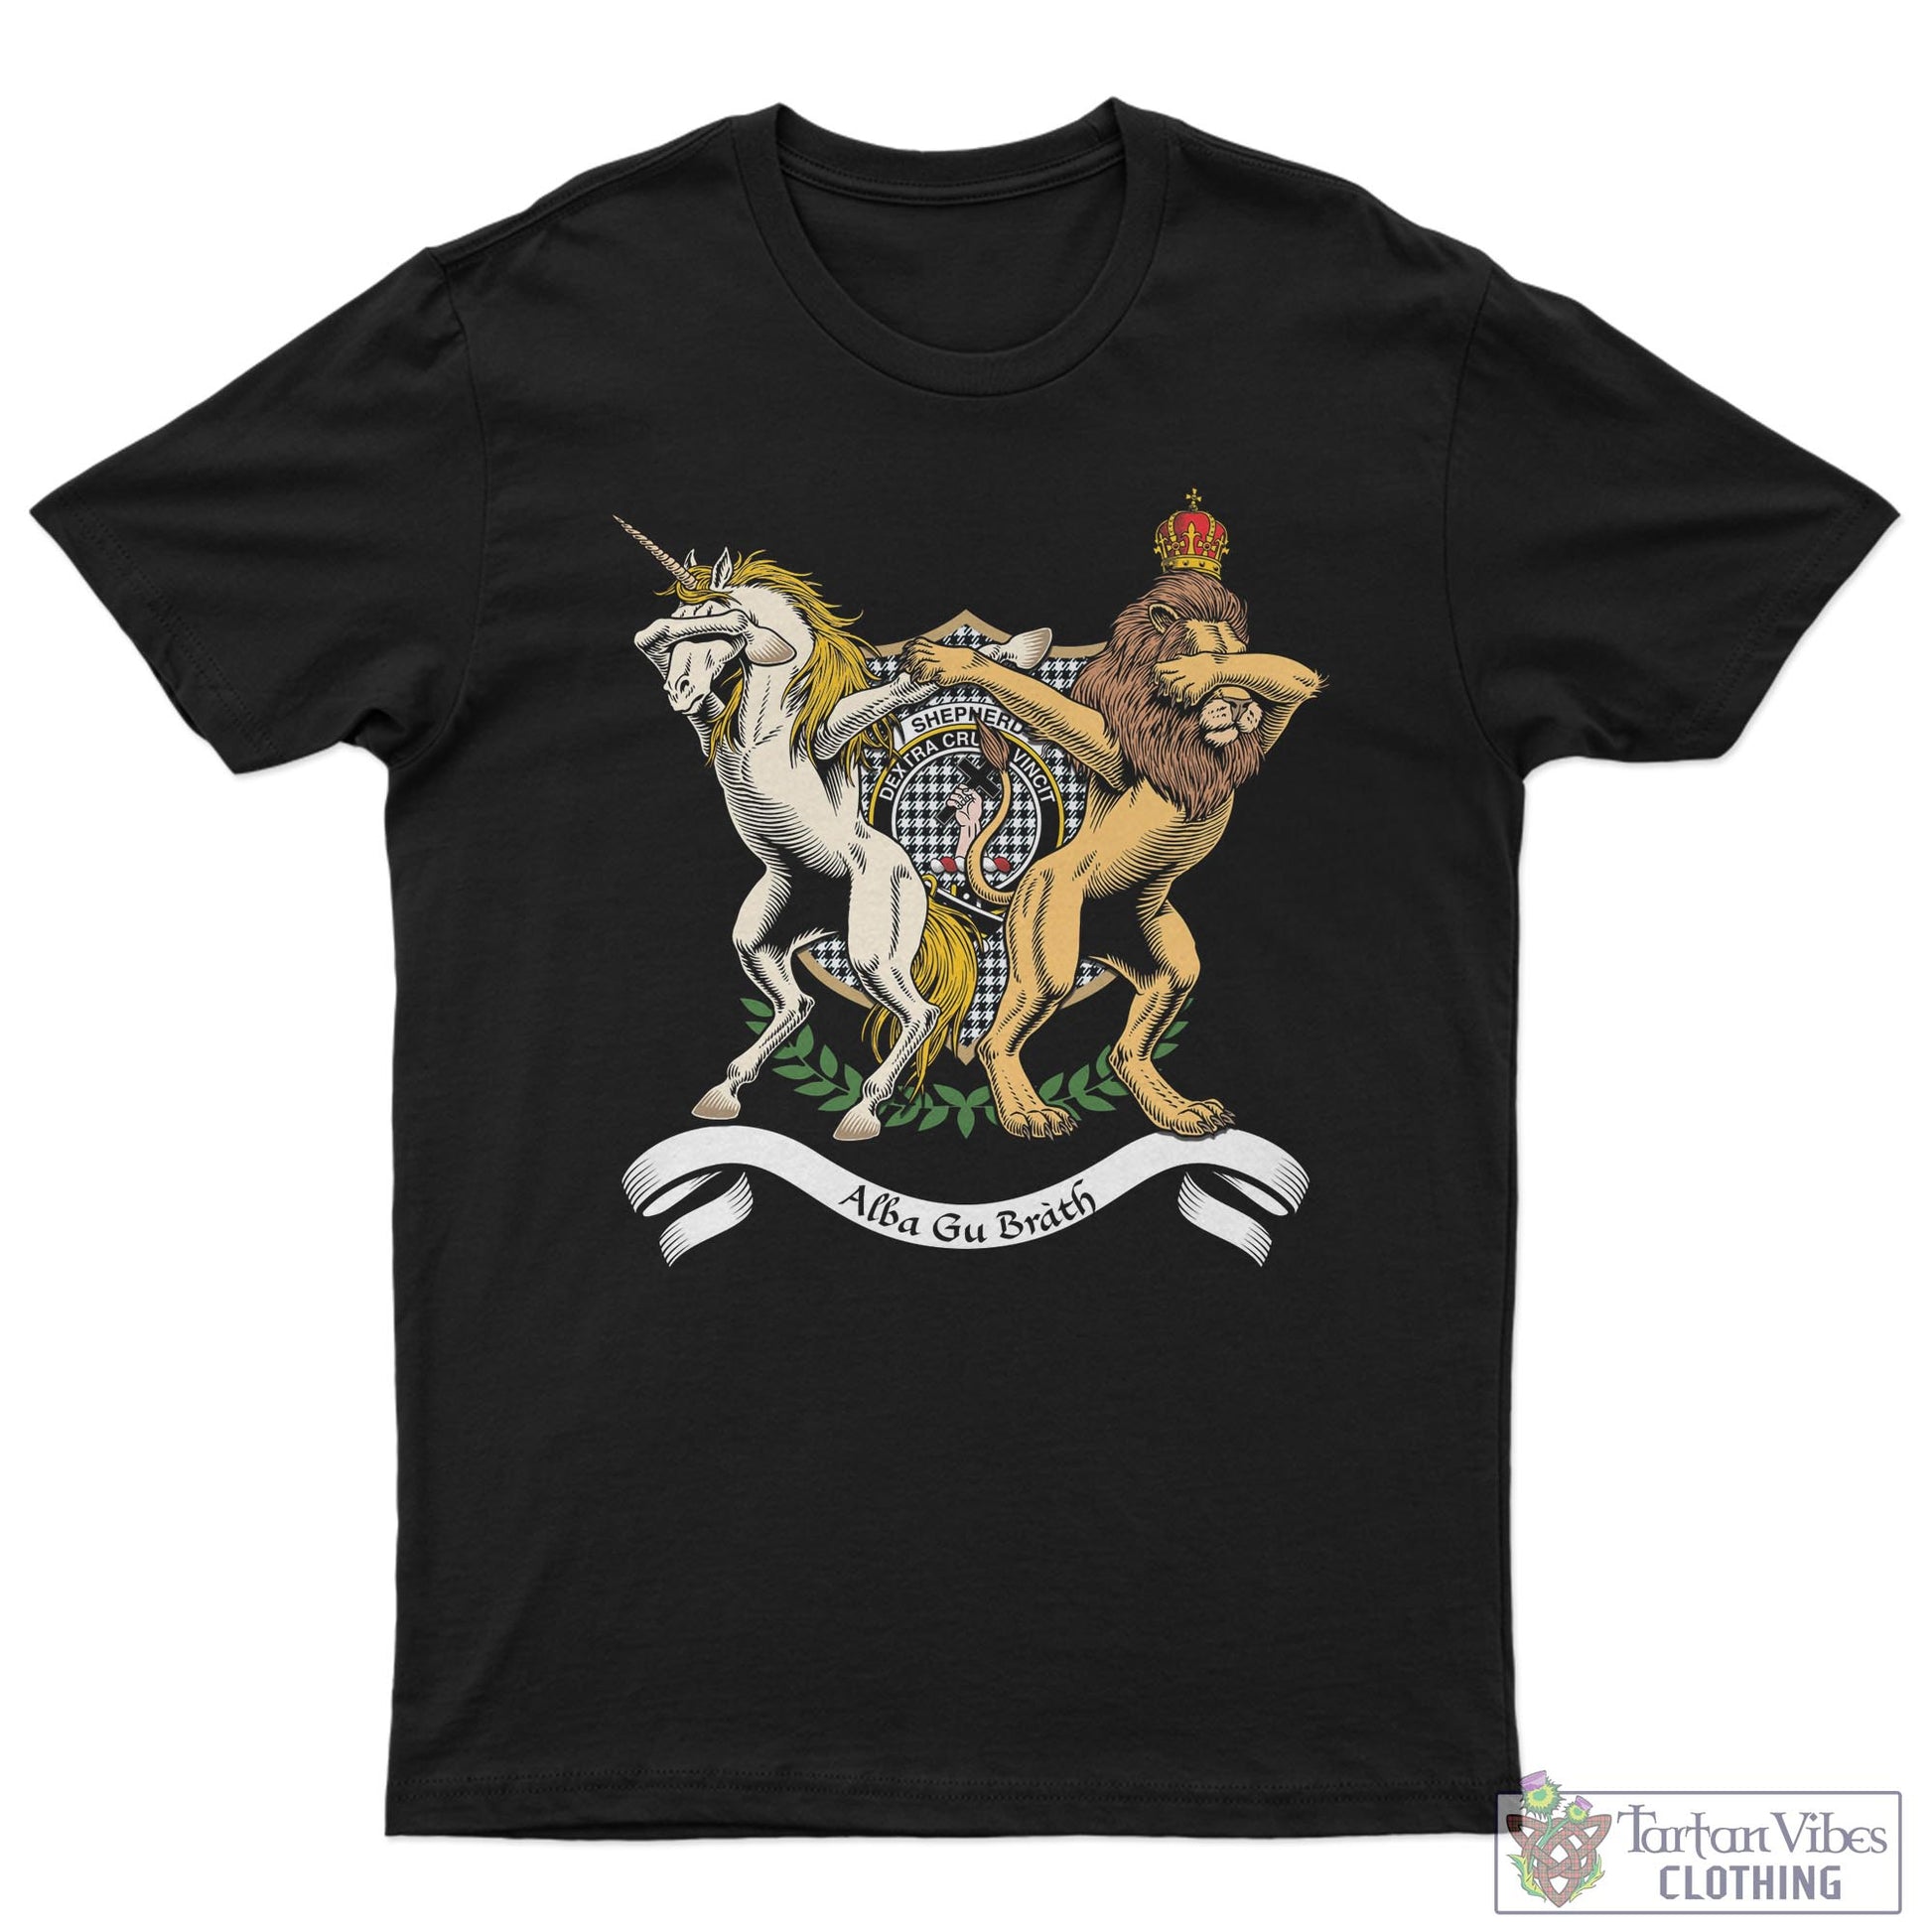 Tartan Vibes Clothing Shepherd Family Crest Cotton Men's T-Shirt with Scotland Royal Coat Of Arm Funny Style